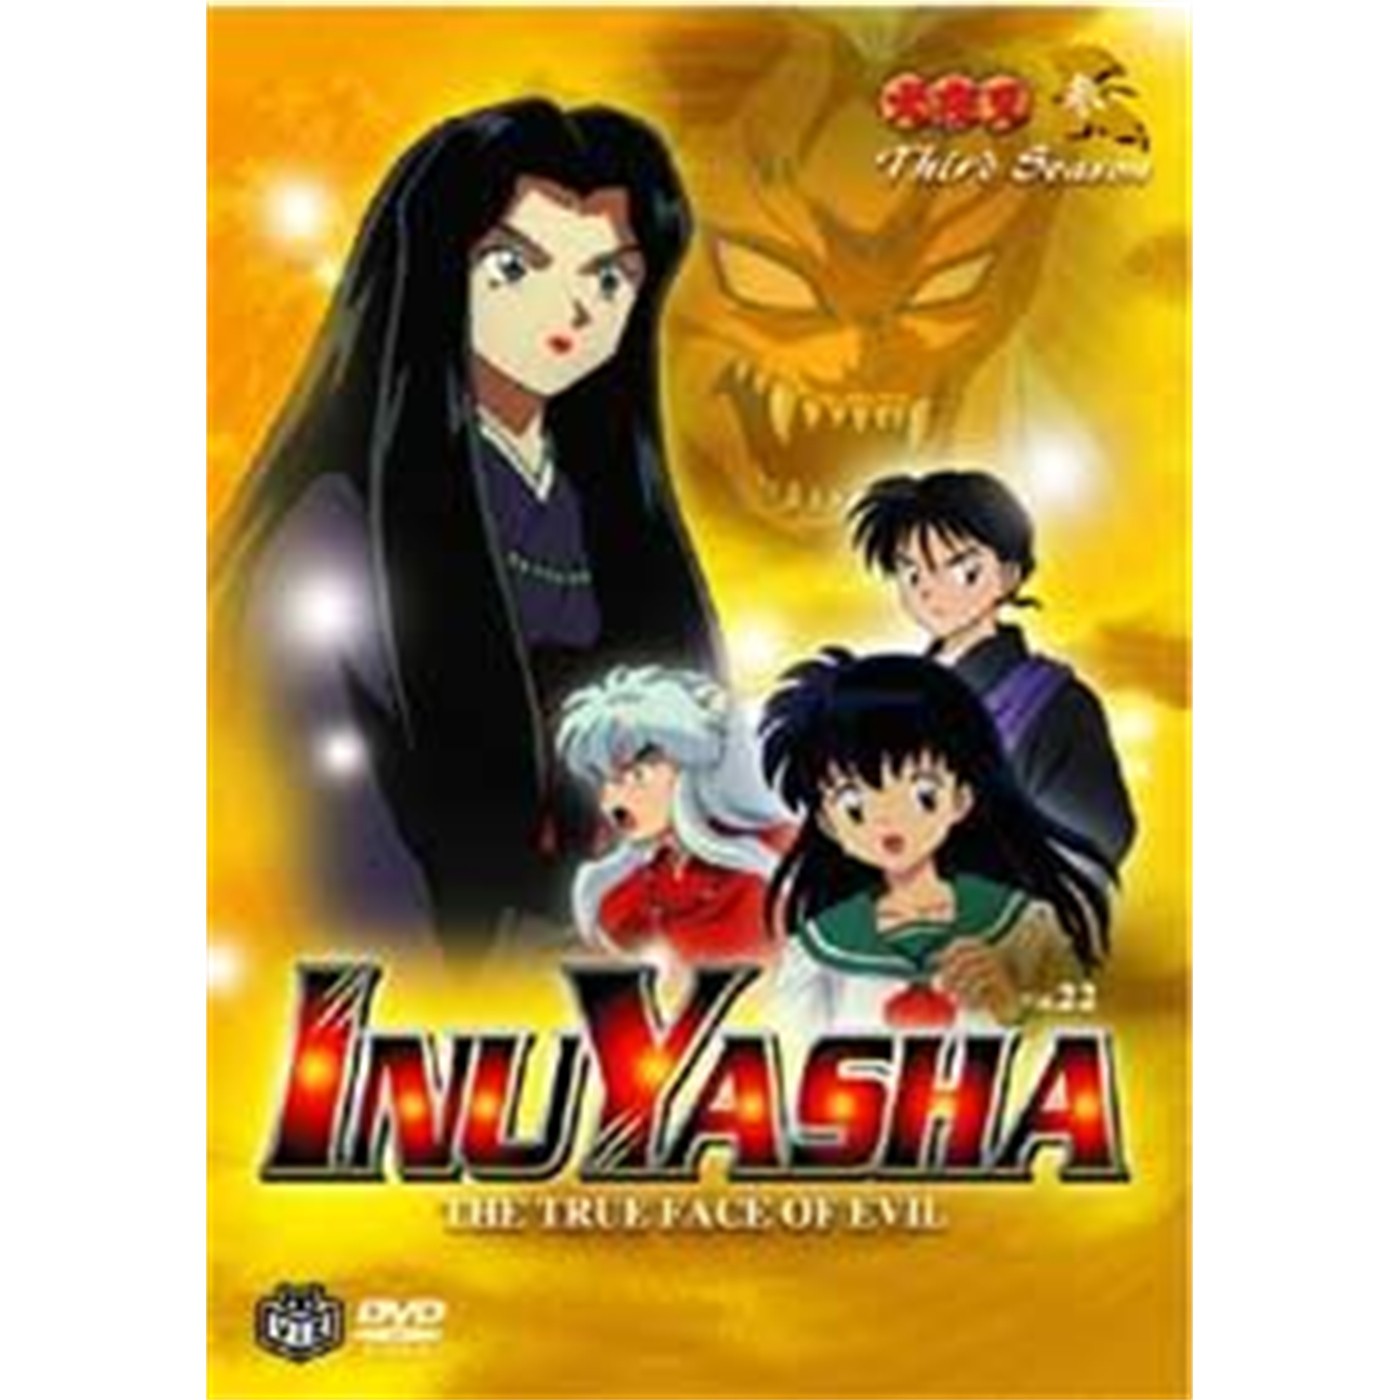 InuYasha, Vol. 22: The True Face of Evil (DVD)